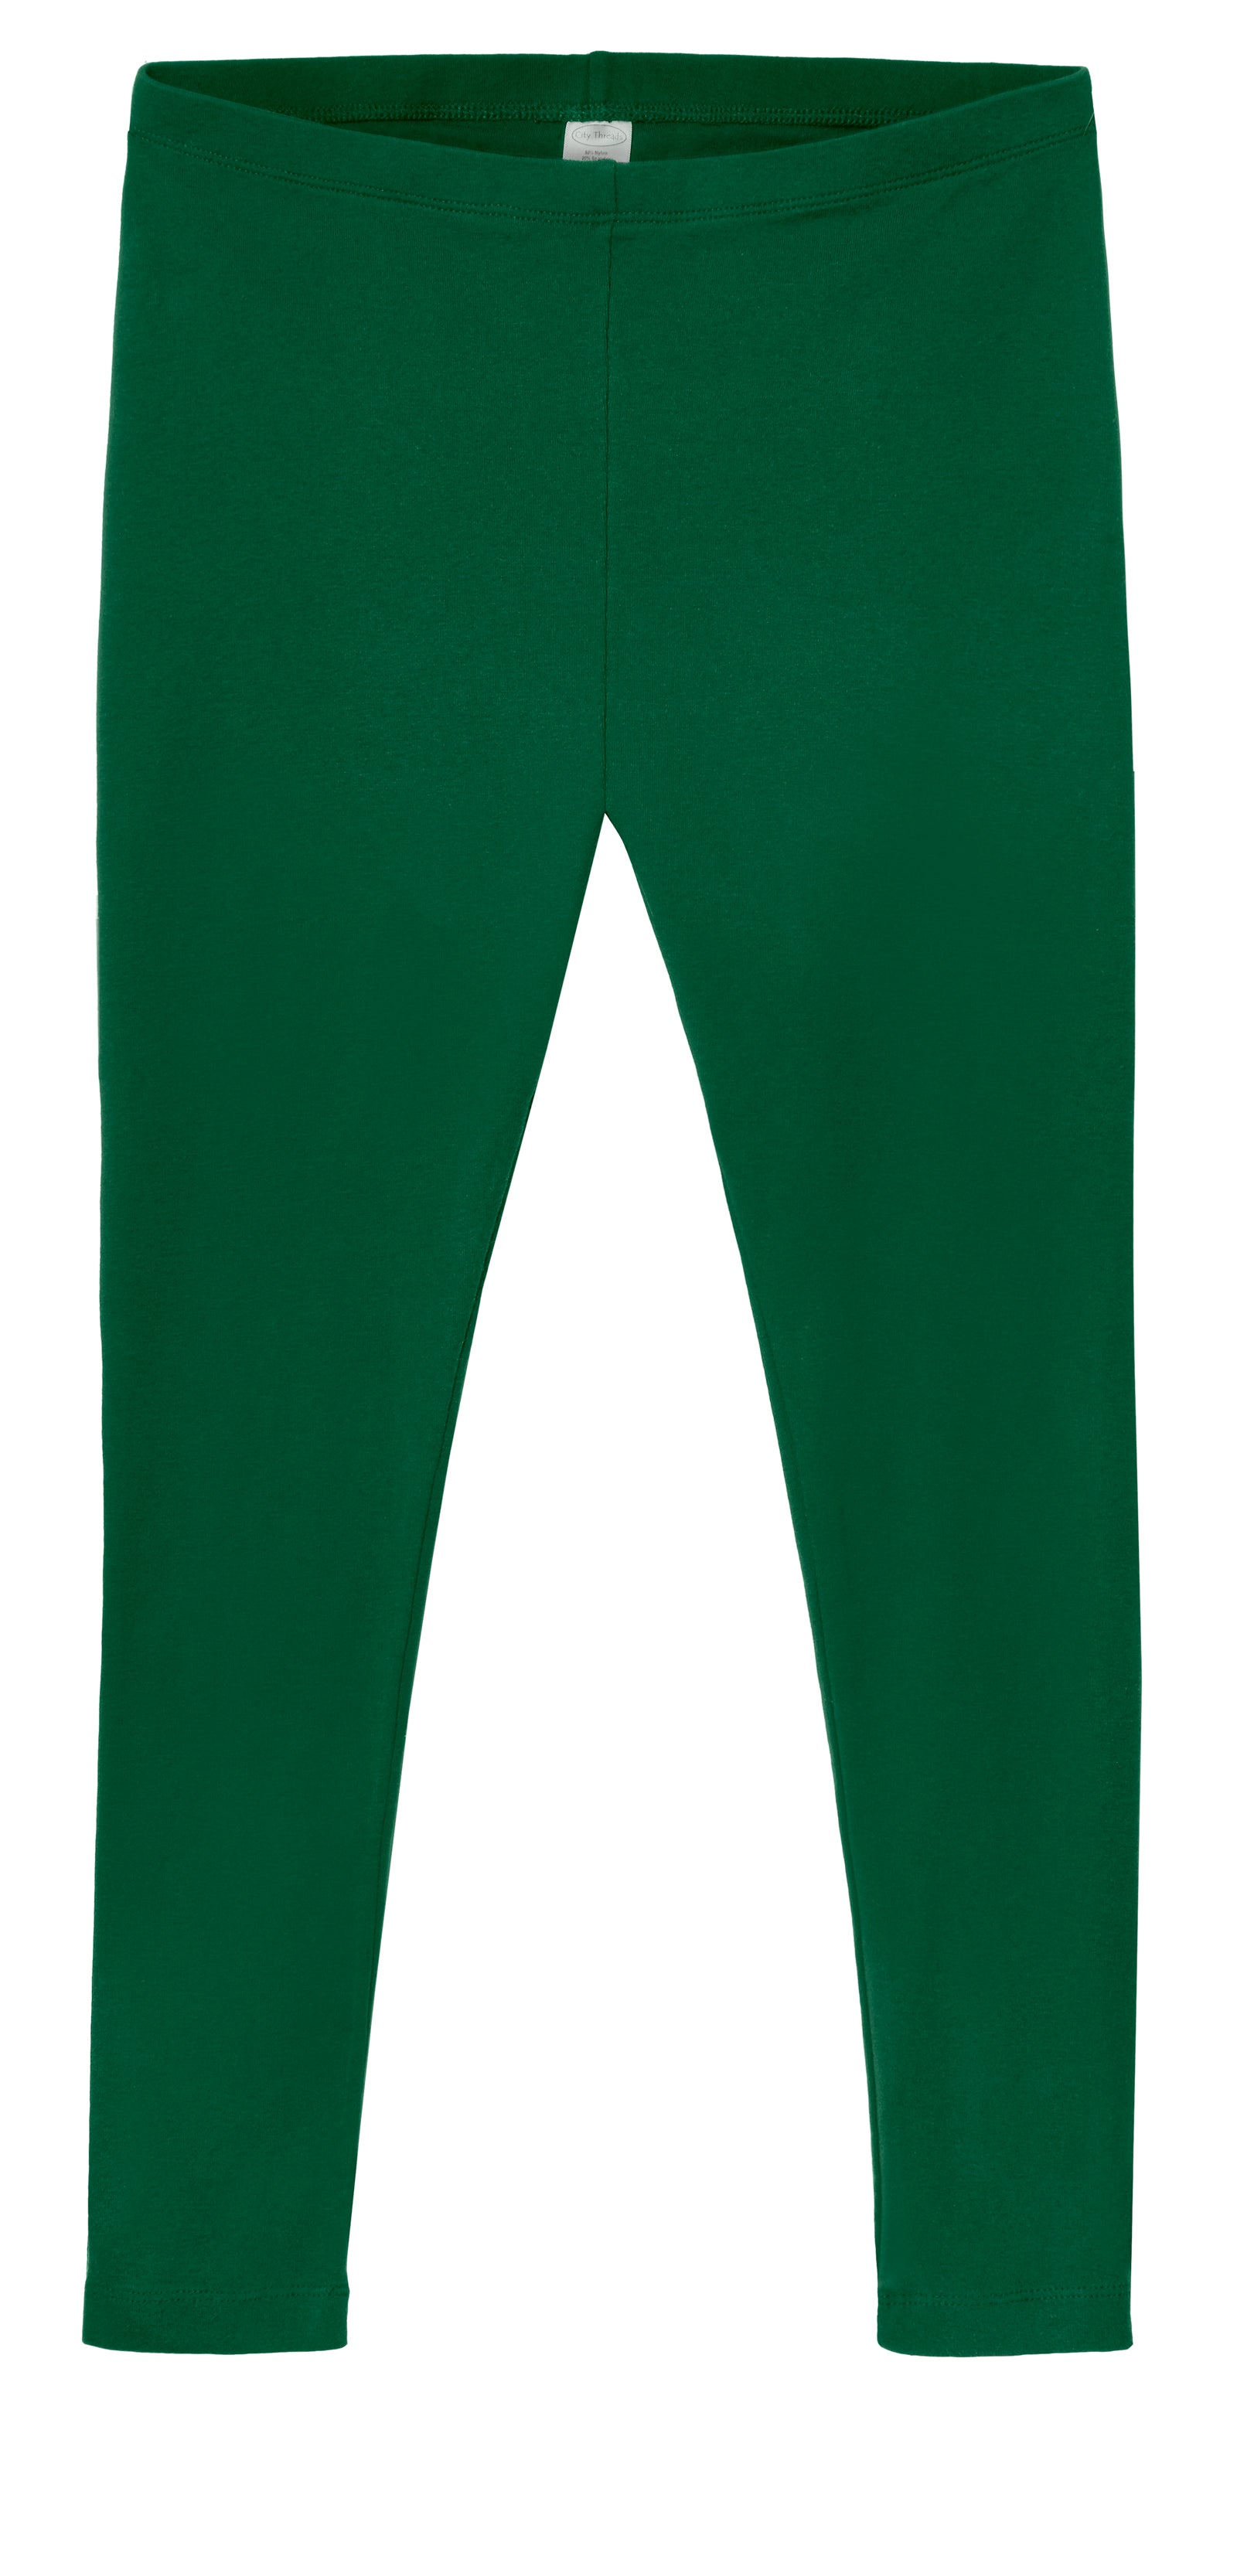 Forest Green Leggings  Green leggings outfit, Outfits with